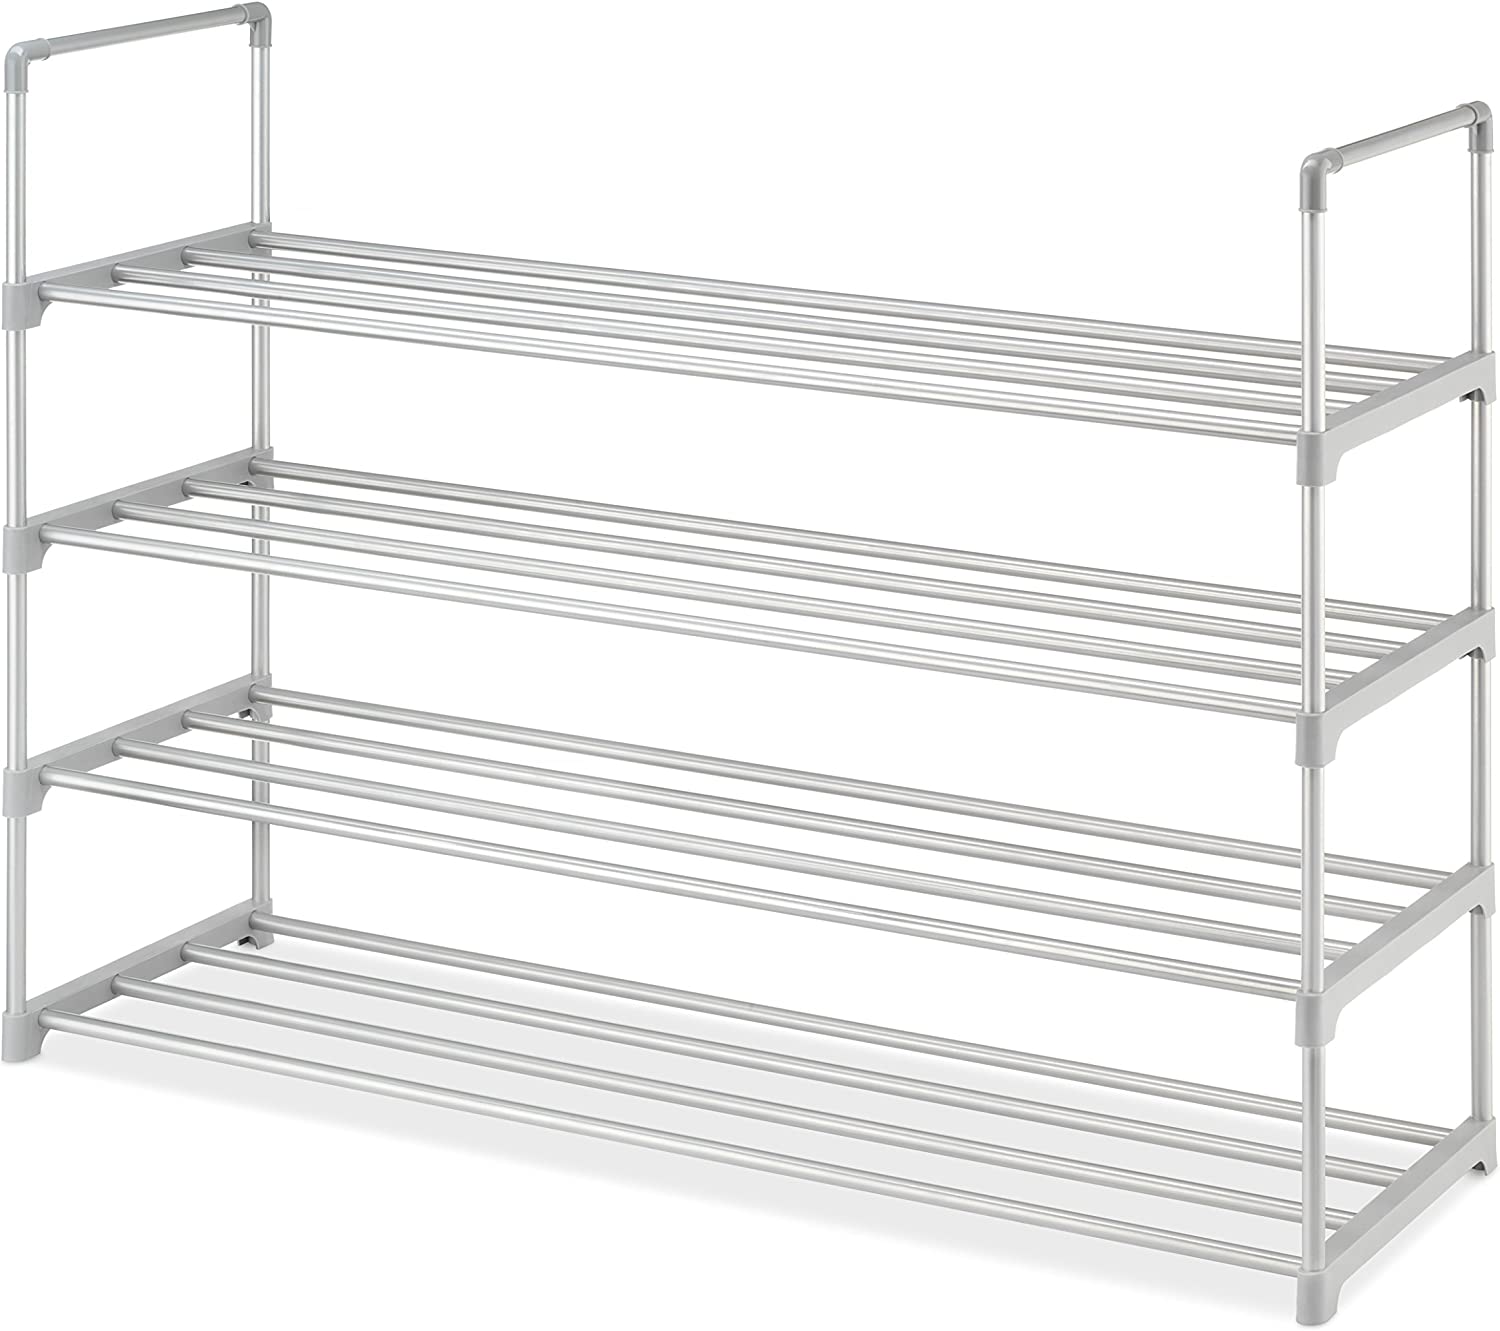 4-Tier Shoe Rack – Gray - LOCAL DELIVERY ONLY